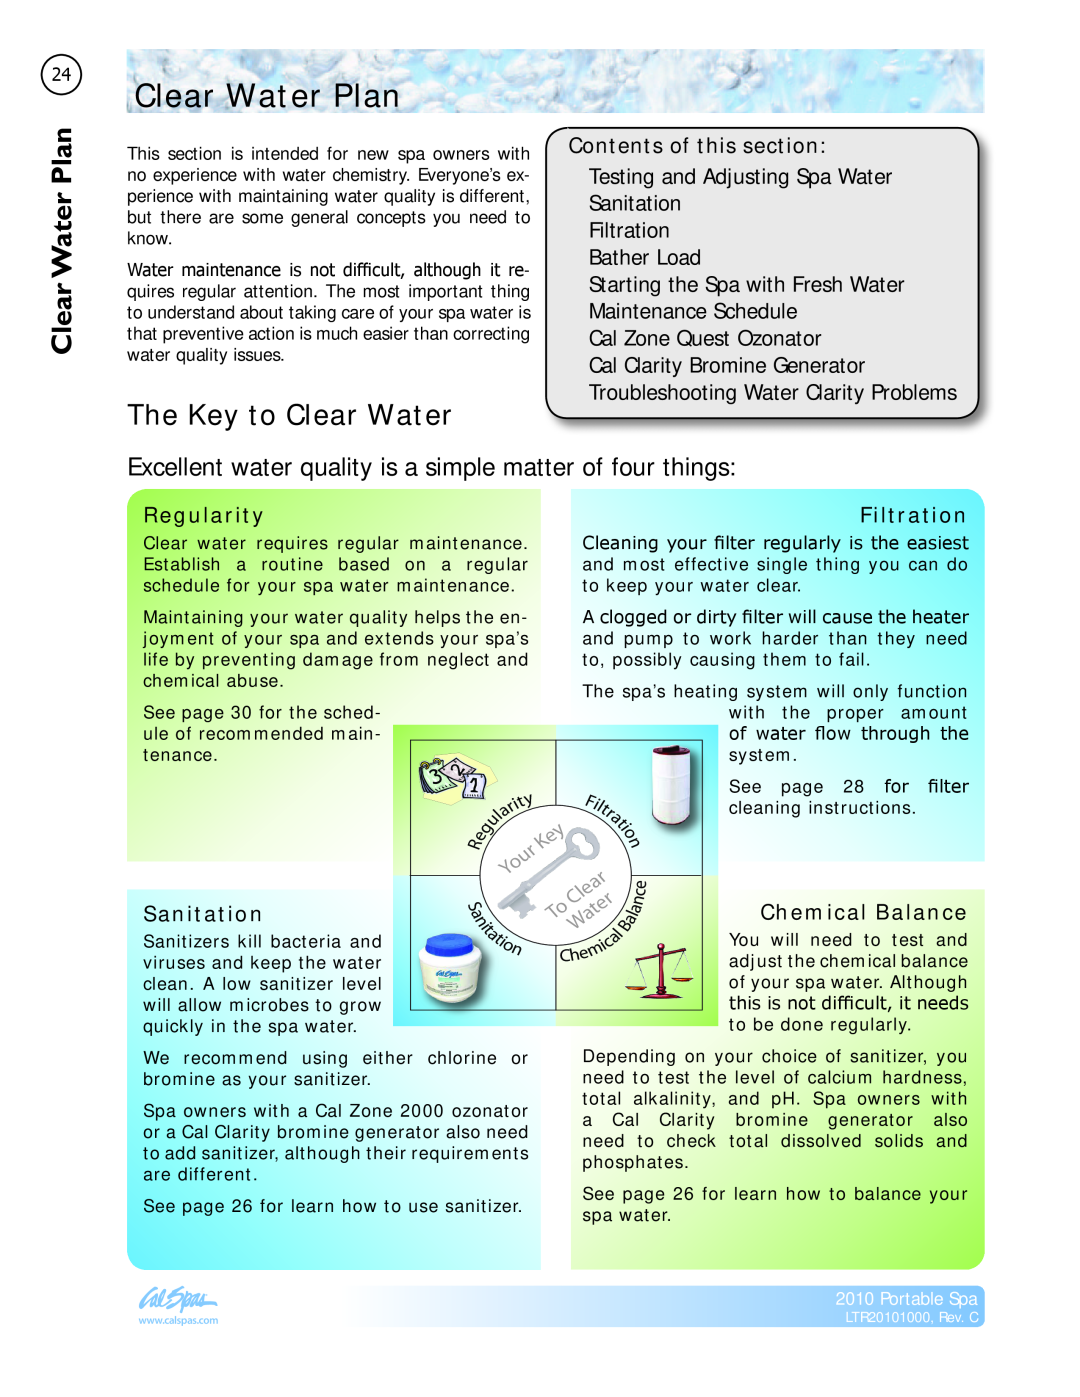 Cal Spas LTR20101000 manual Clear Water Plan, Clear PlanWater, The Key to Clear Water 